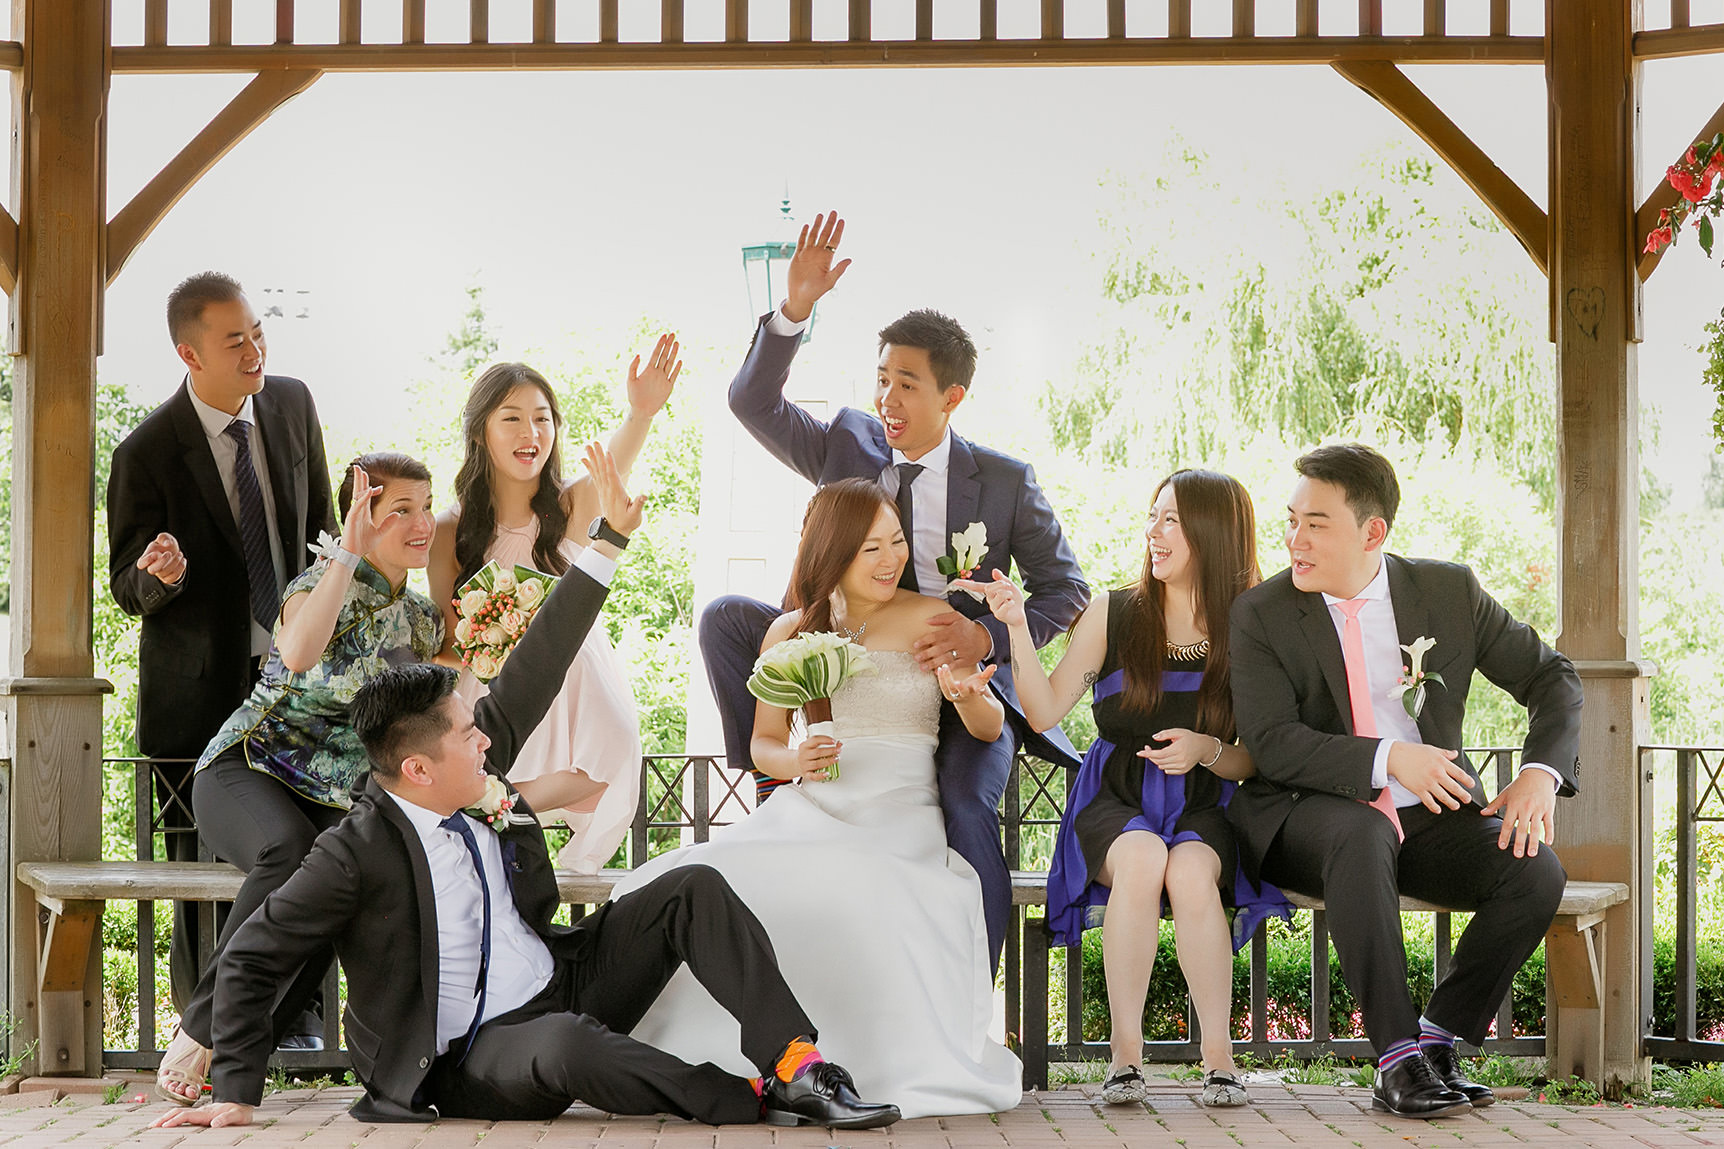 A candid portrait of the wedding party